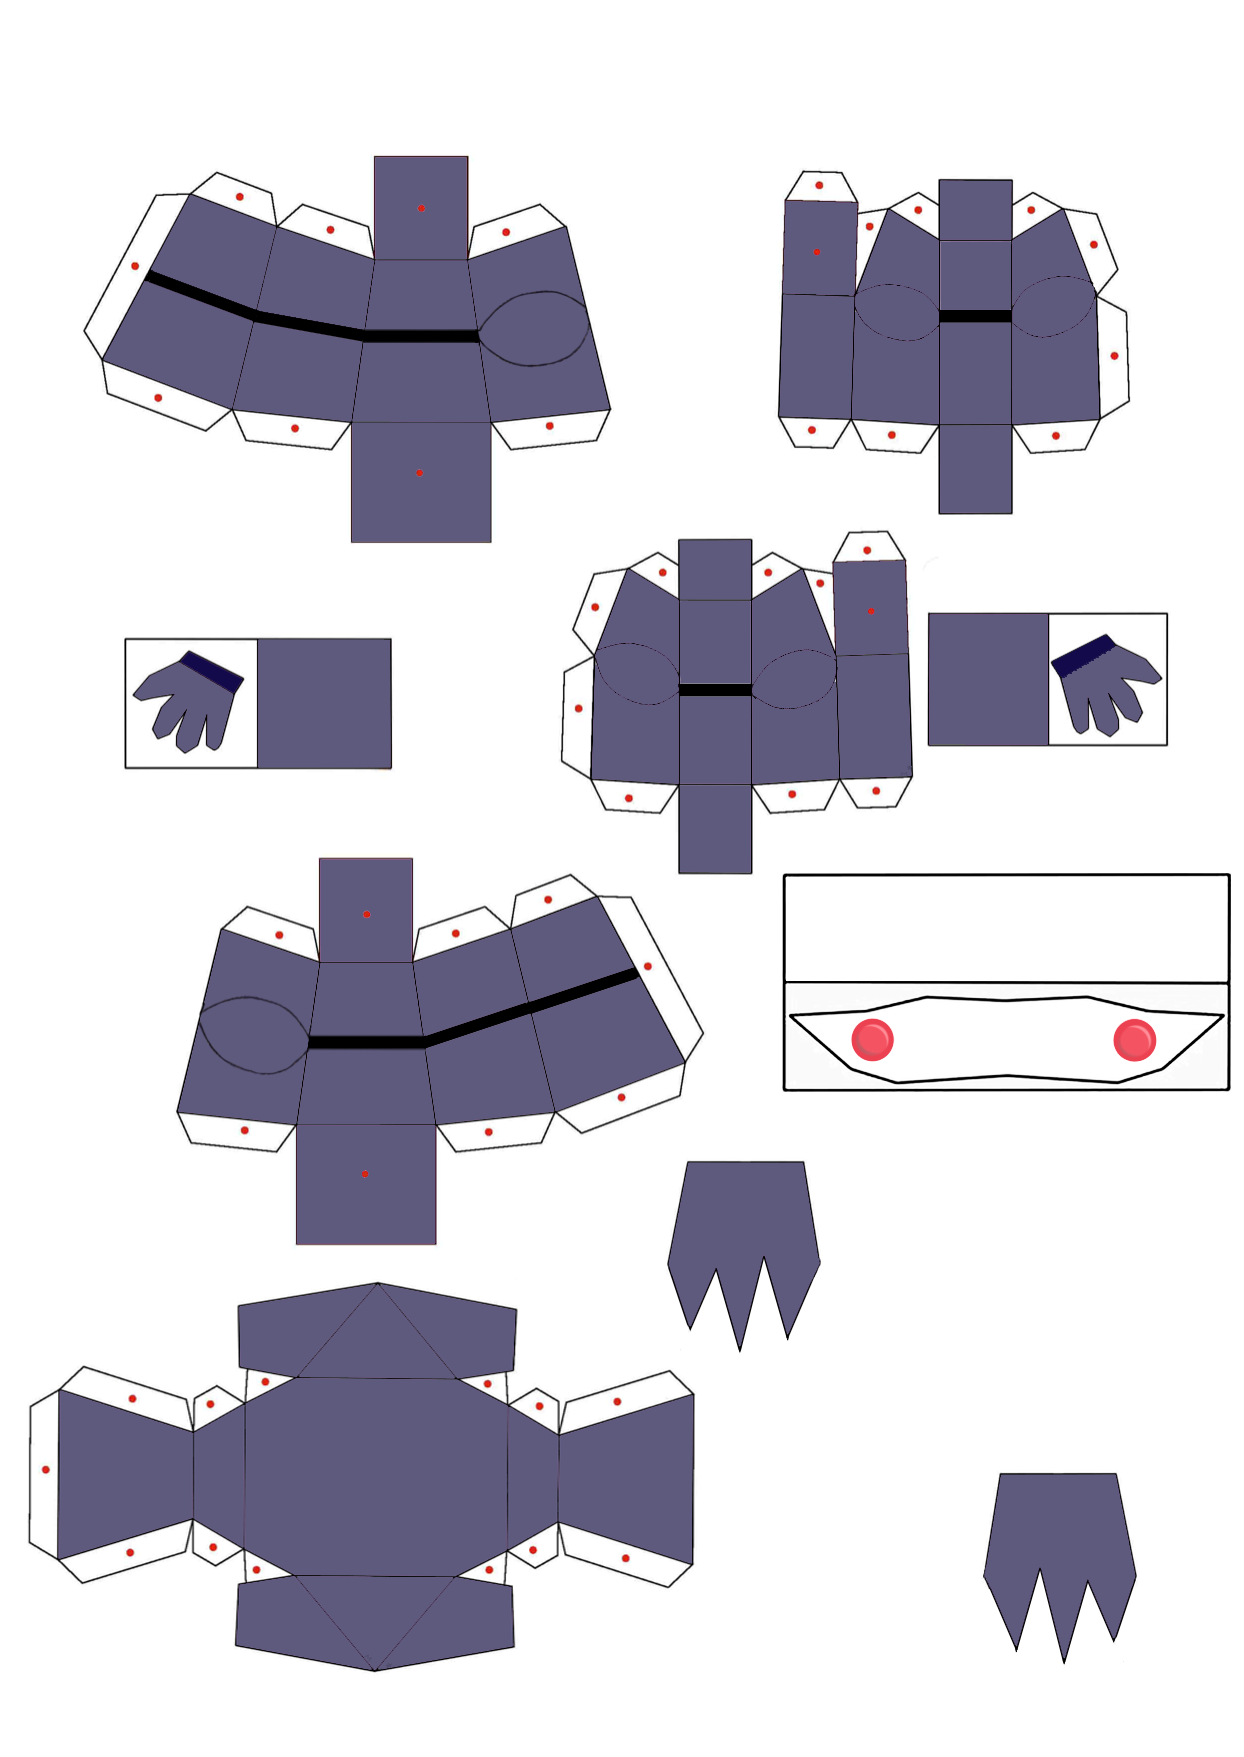 five nights at freddy's papercraft Sugar Pt1 v2.0 by